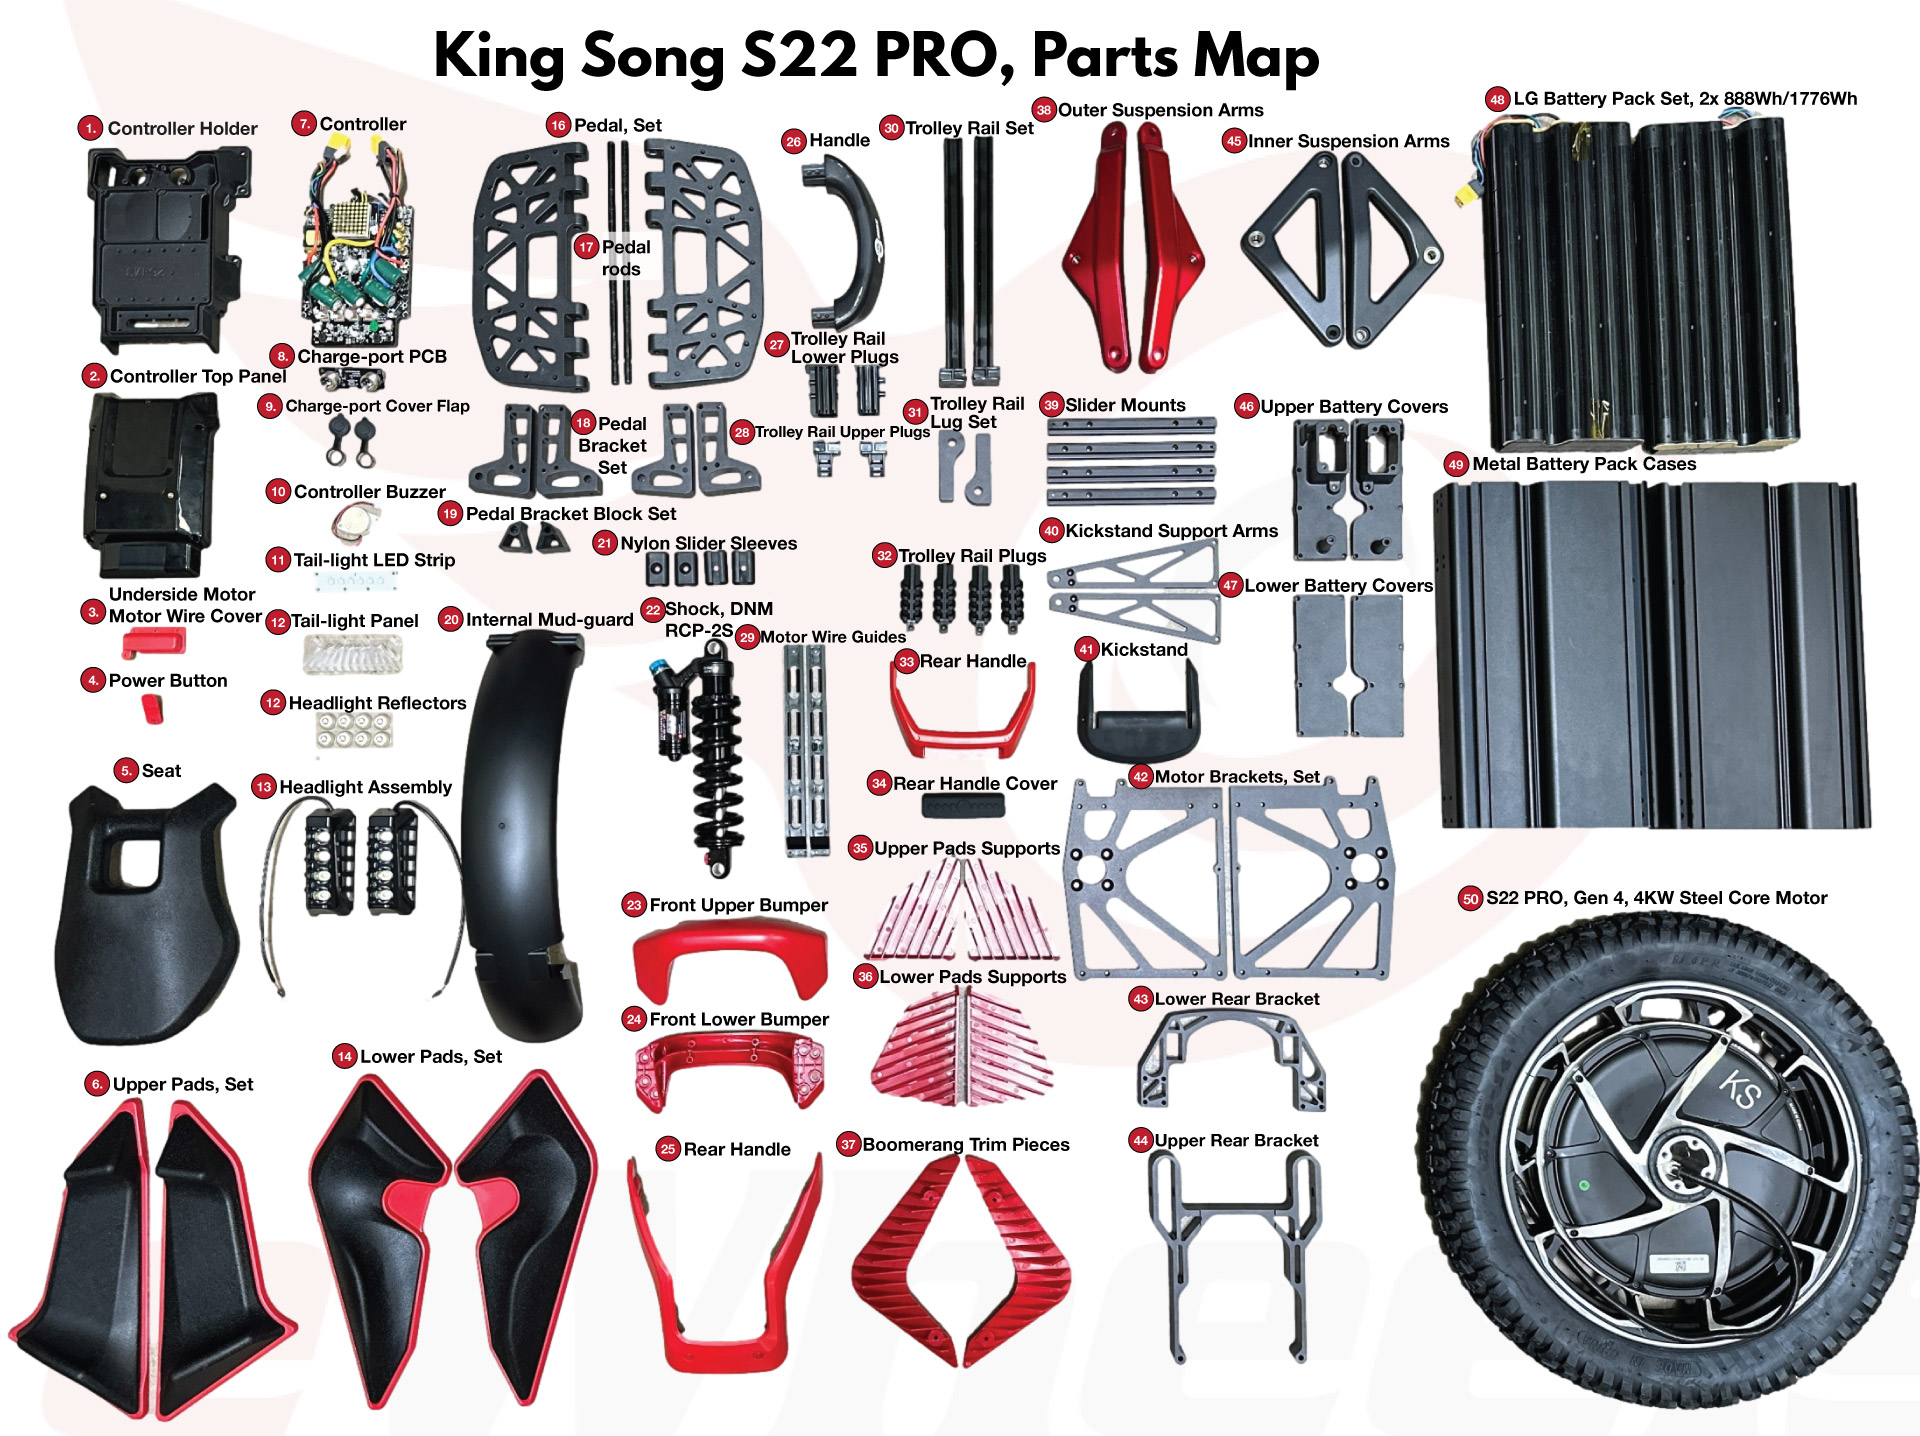 King Song S22 Parts Map Overview